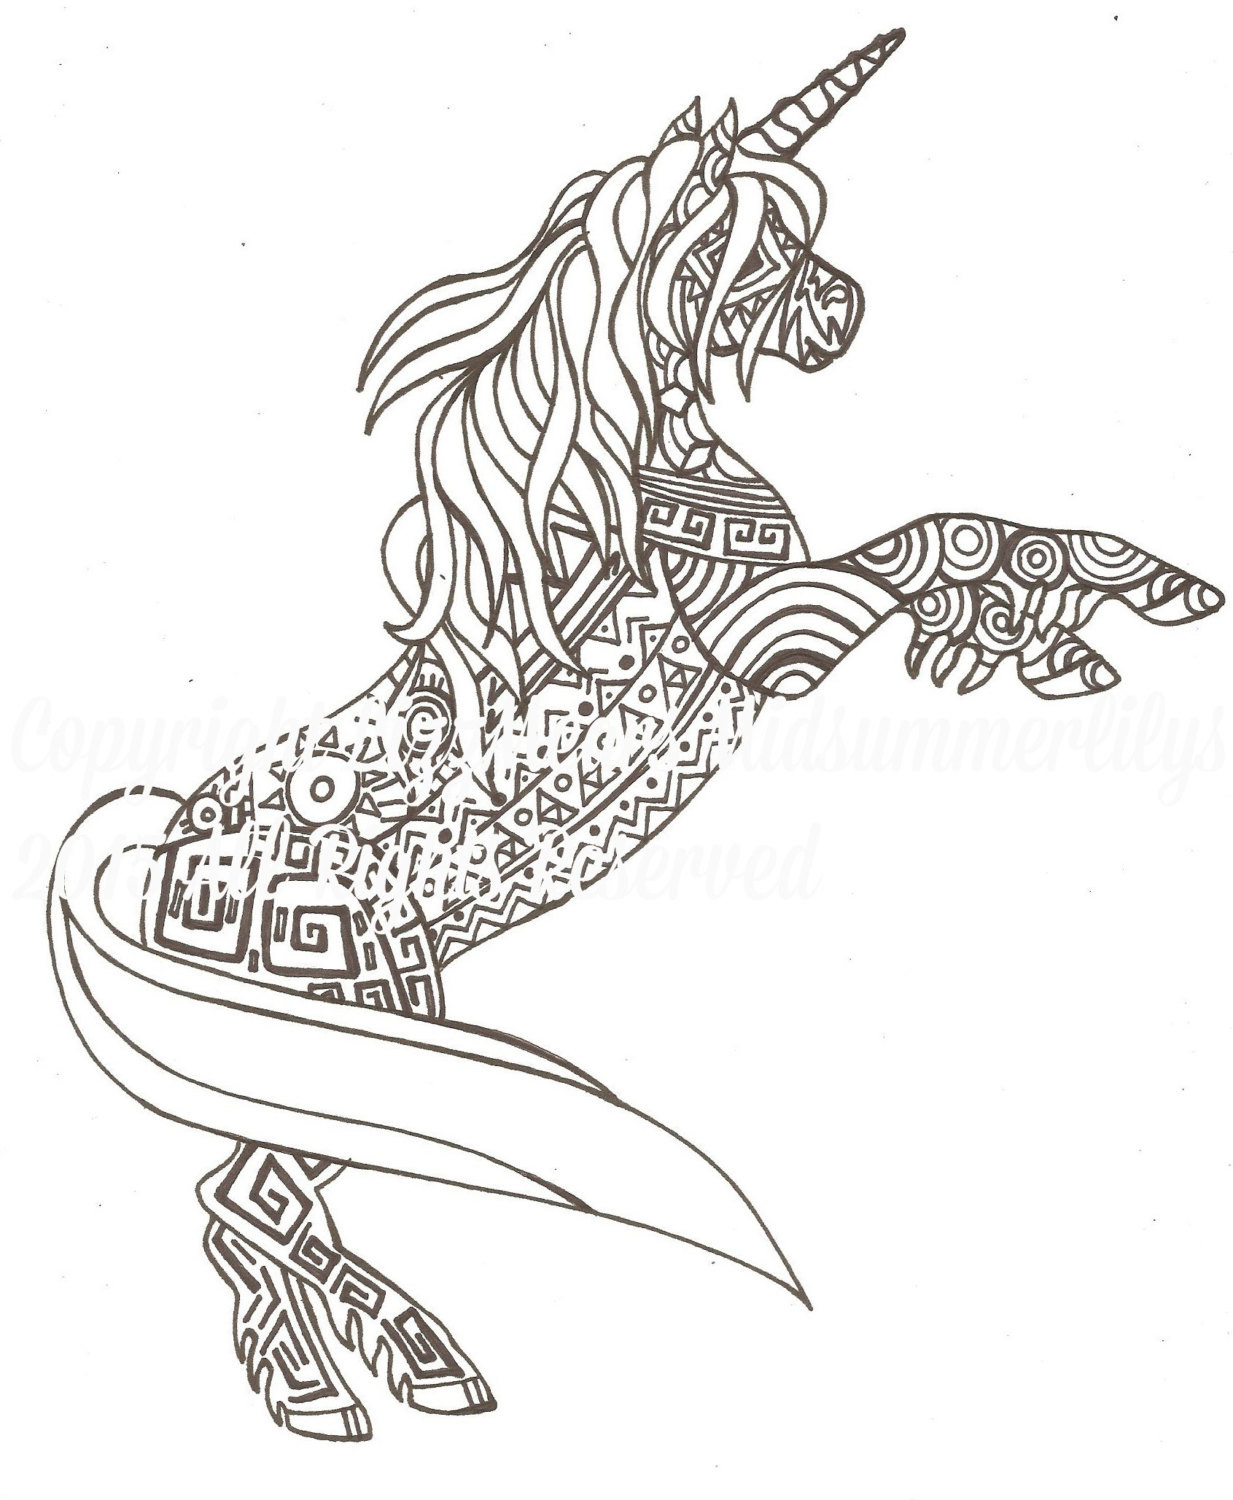 Unicorn Adult Coloring Book
 Aztec Unicorn Grown Ups Adult Colouring Page by LizzMearsIDUK